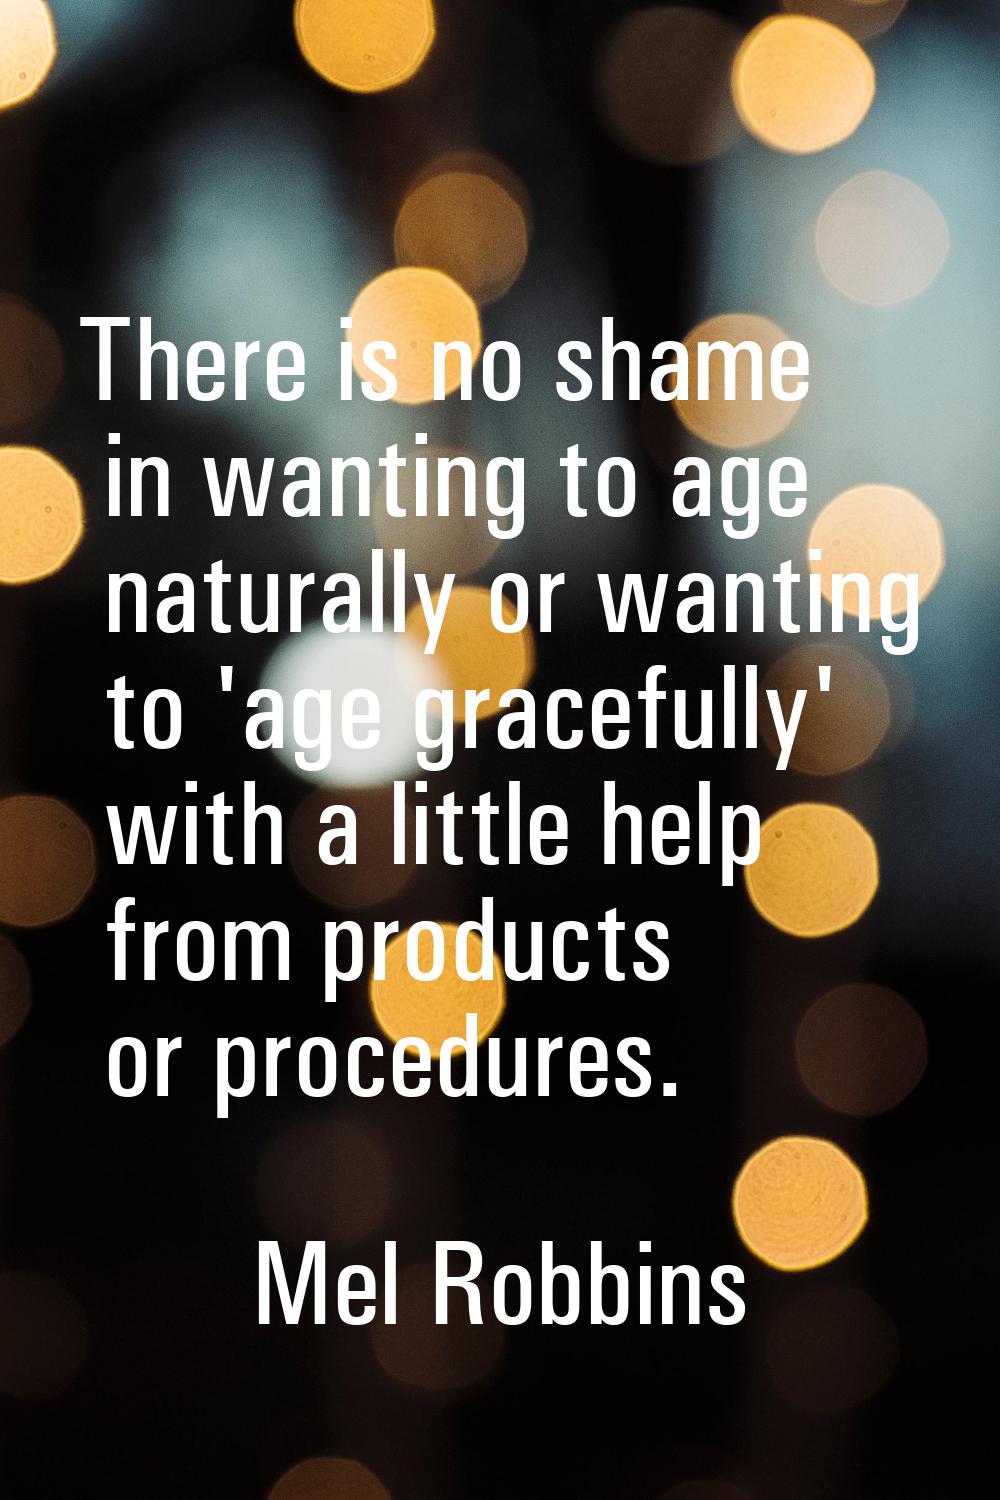 There is no shame in wanting to age naturally or wanting to 'age gracefully' with a little help fro